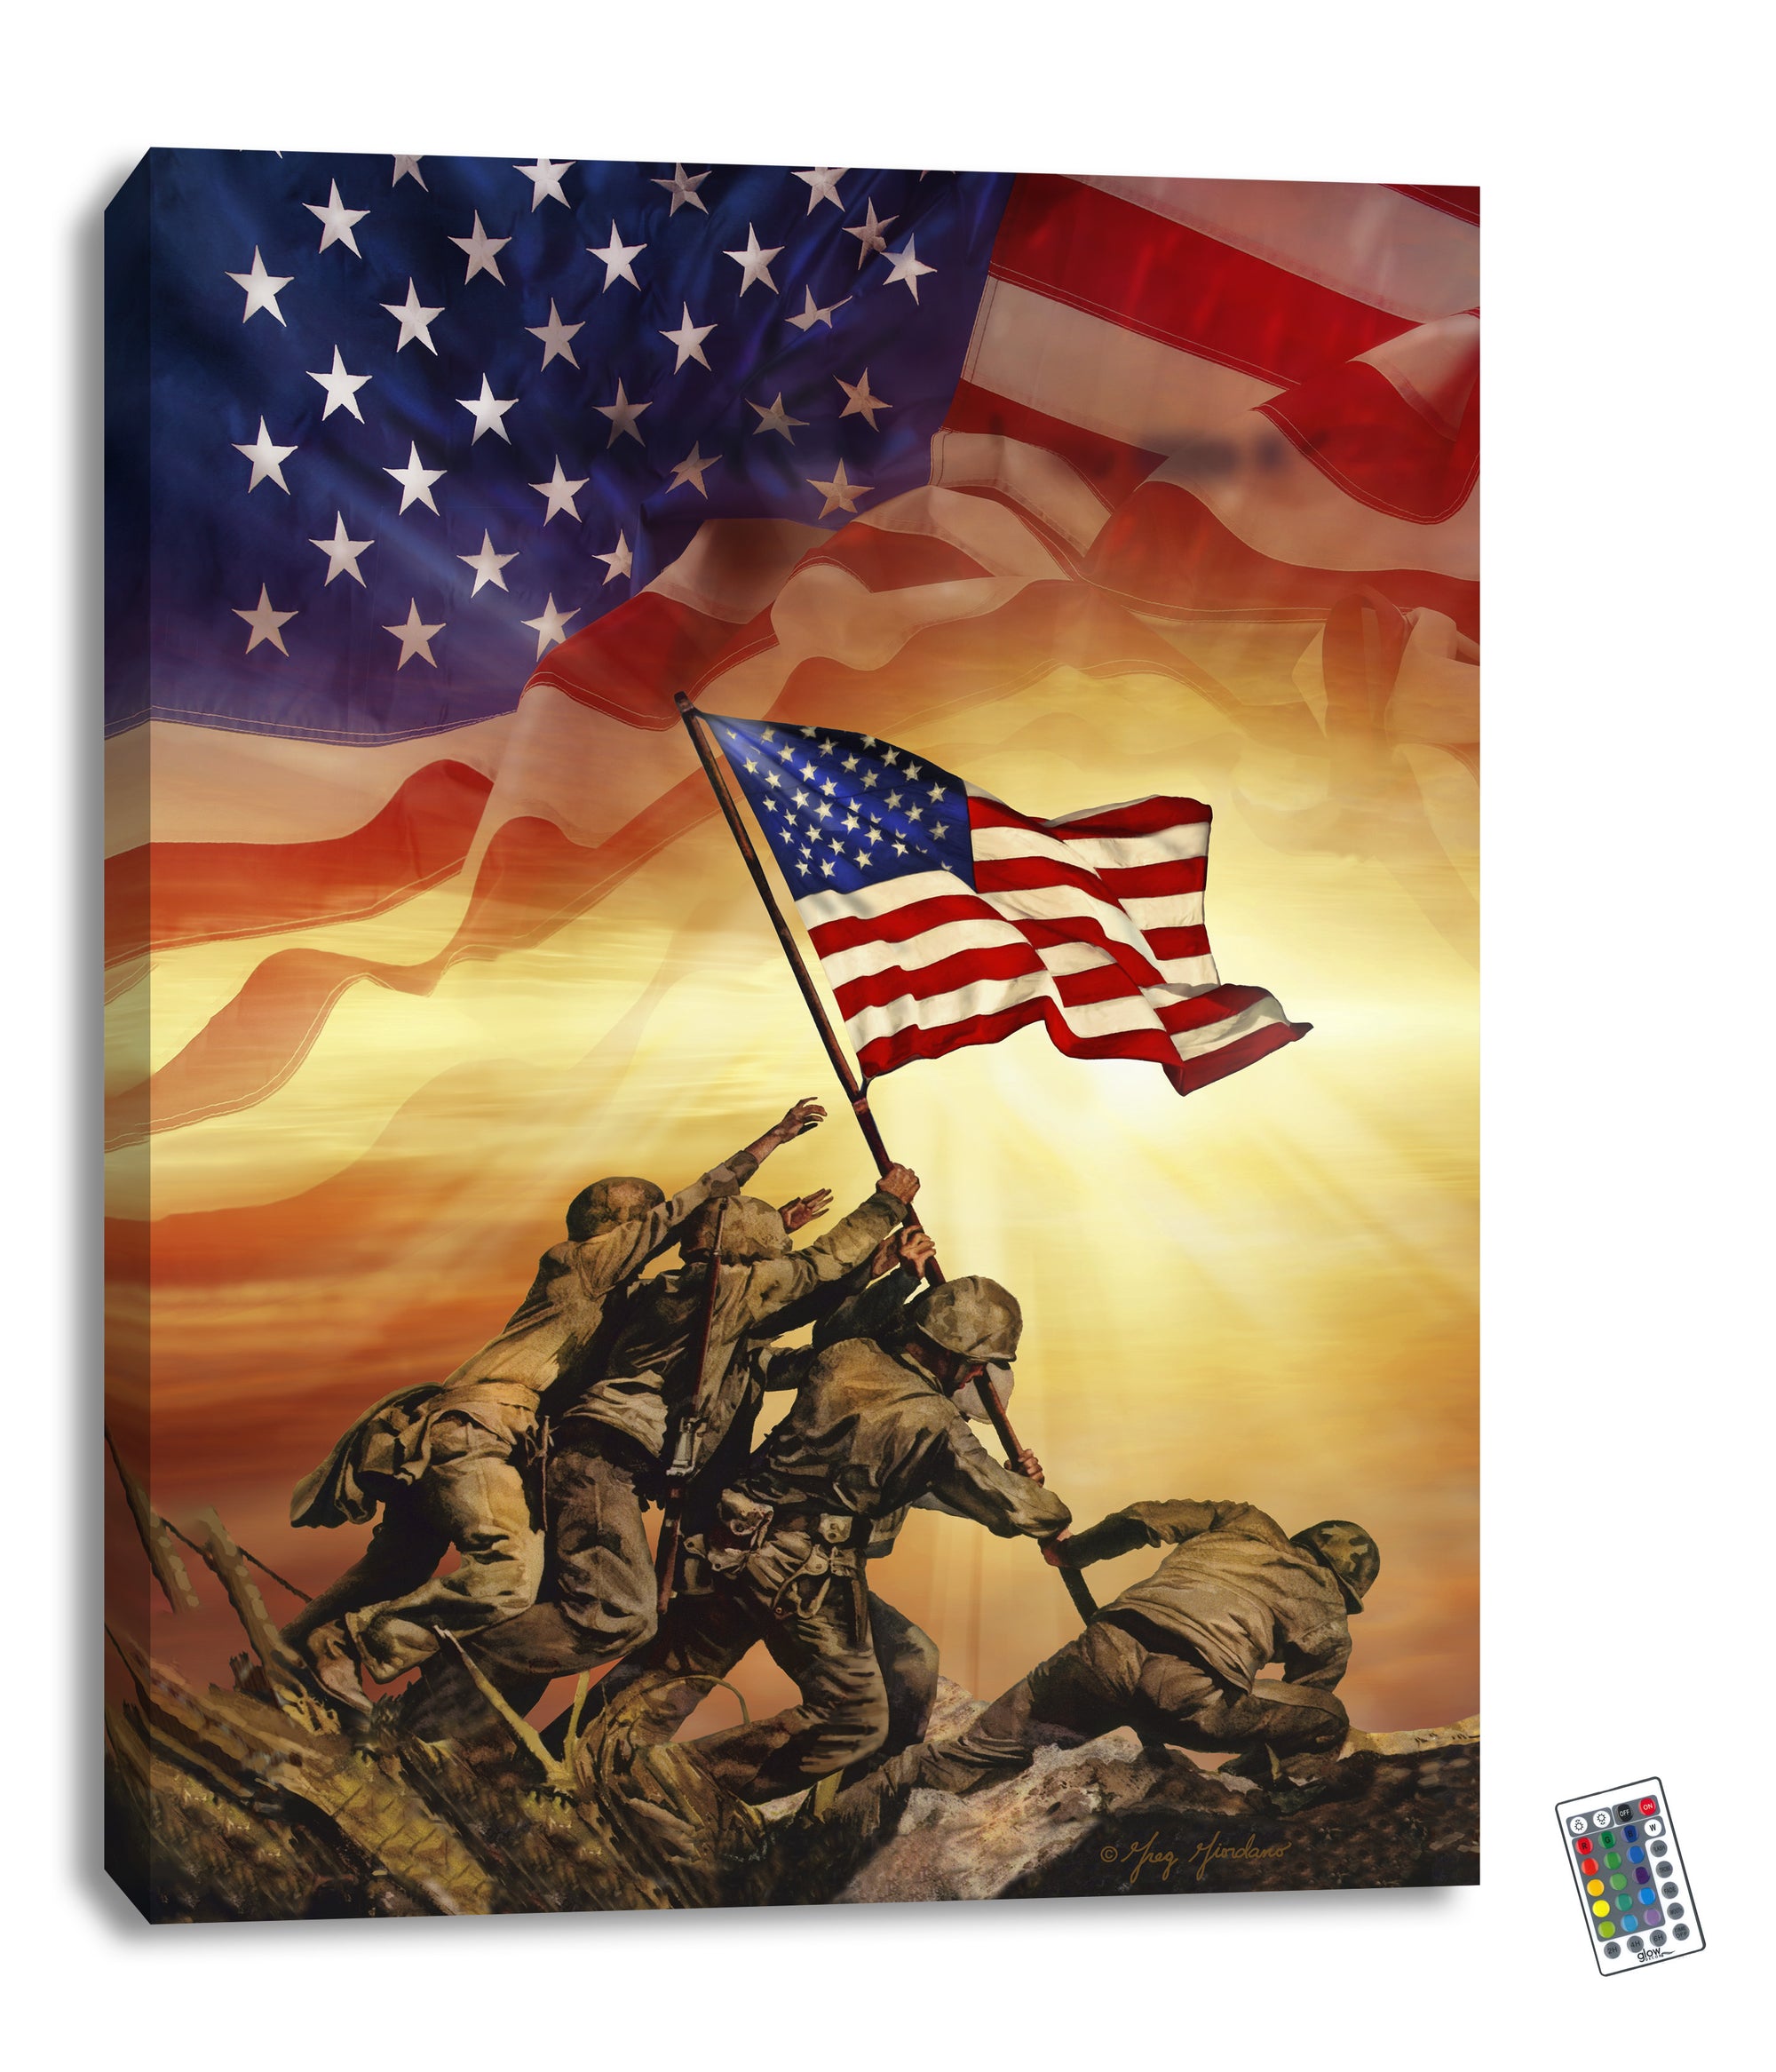 Home of the Brave 18x24 Fully Illuminated LED Wall Art